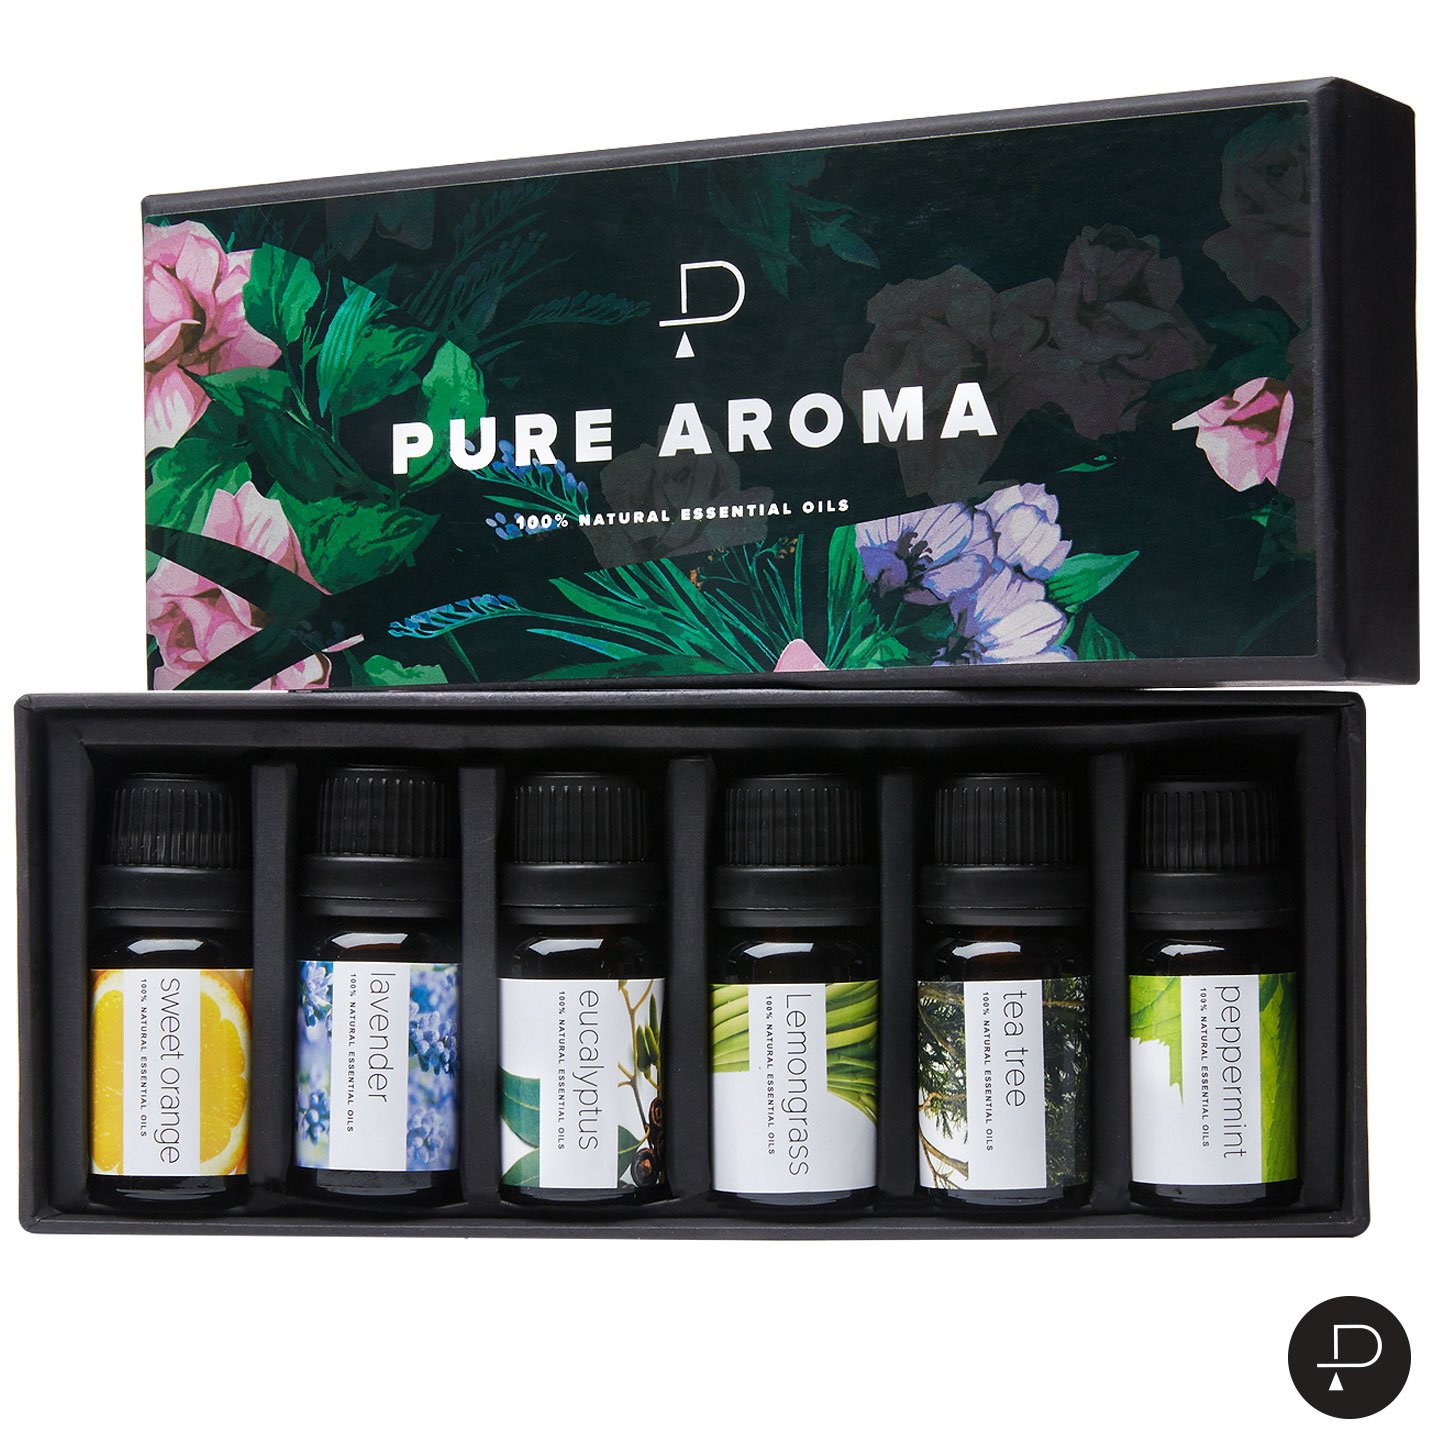 Review of Aromatherapy Oils Gift Set - 6 Pack 10ml Essential Oils by PURE AROMA